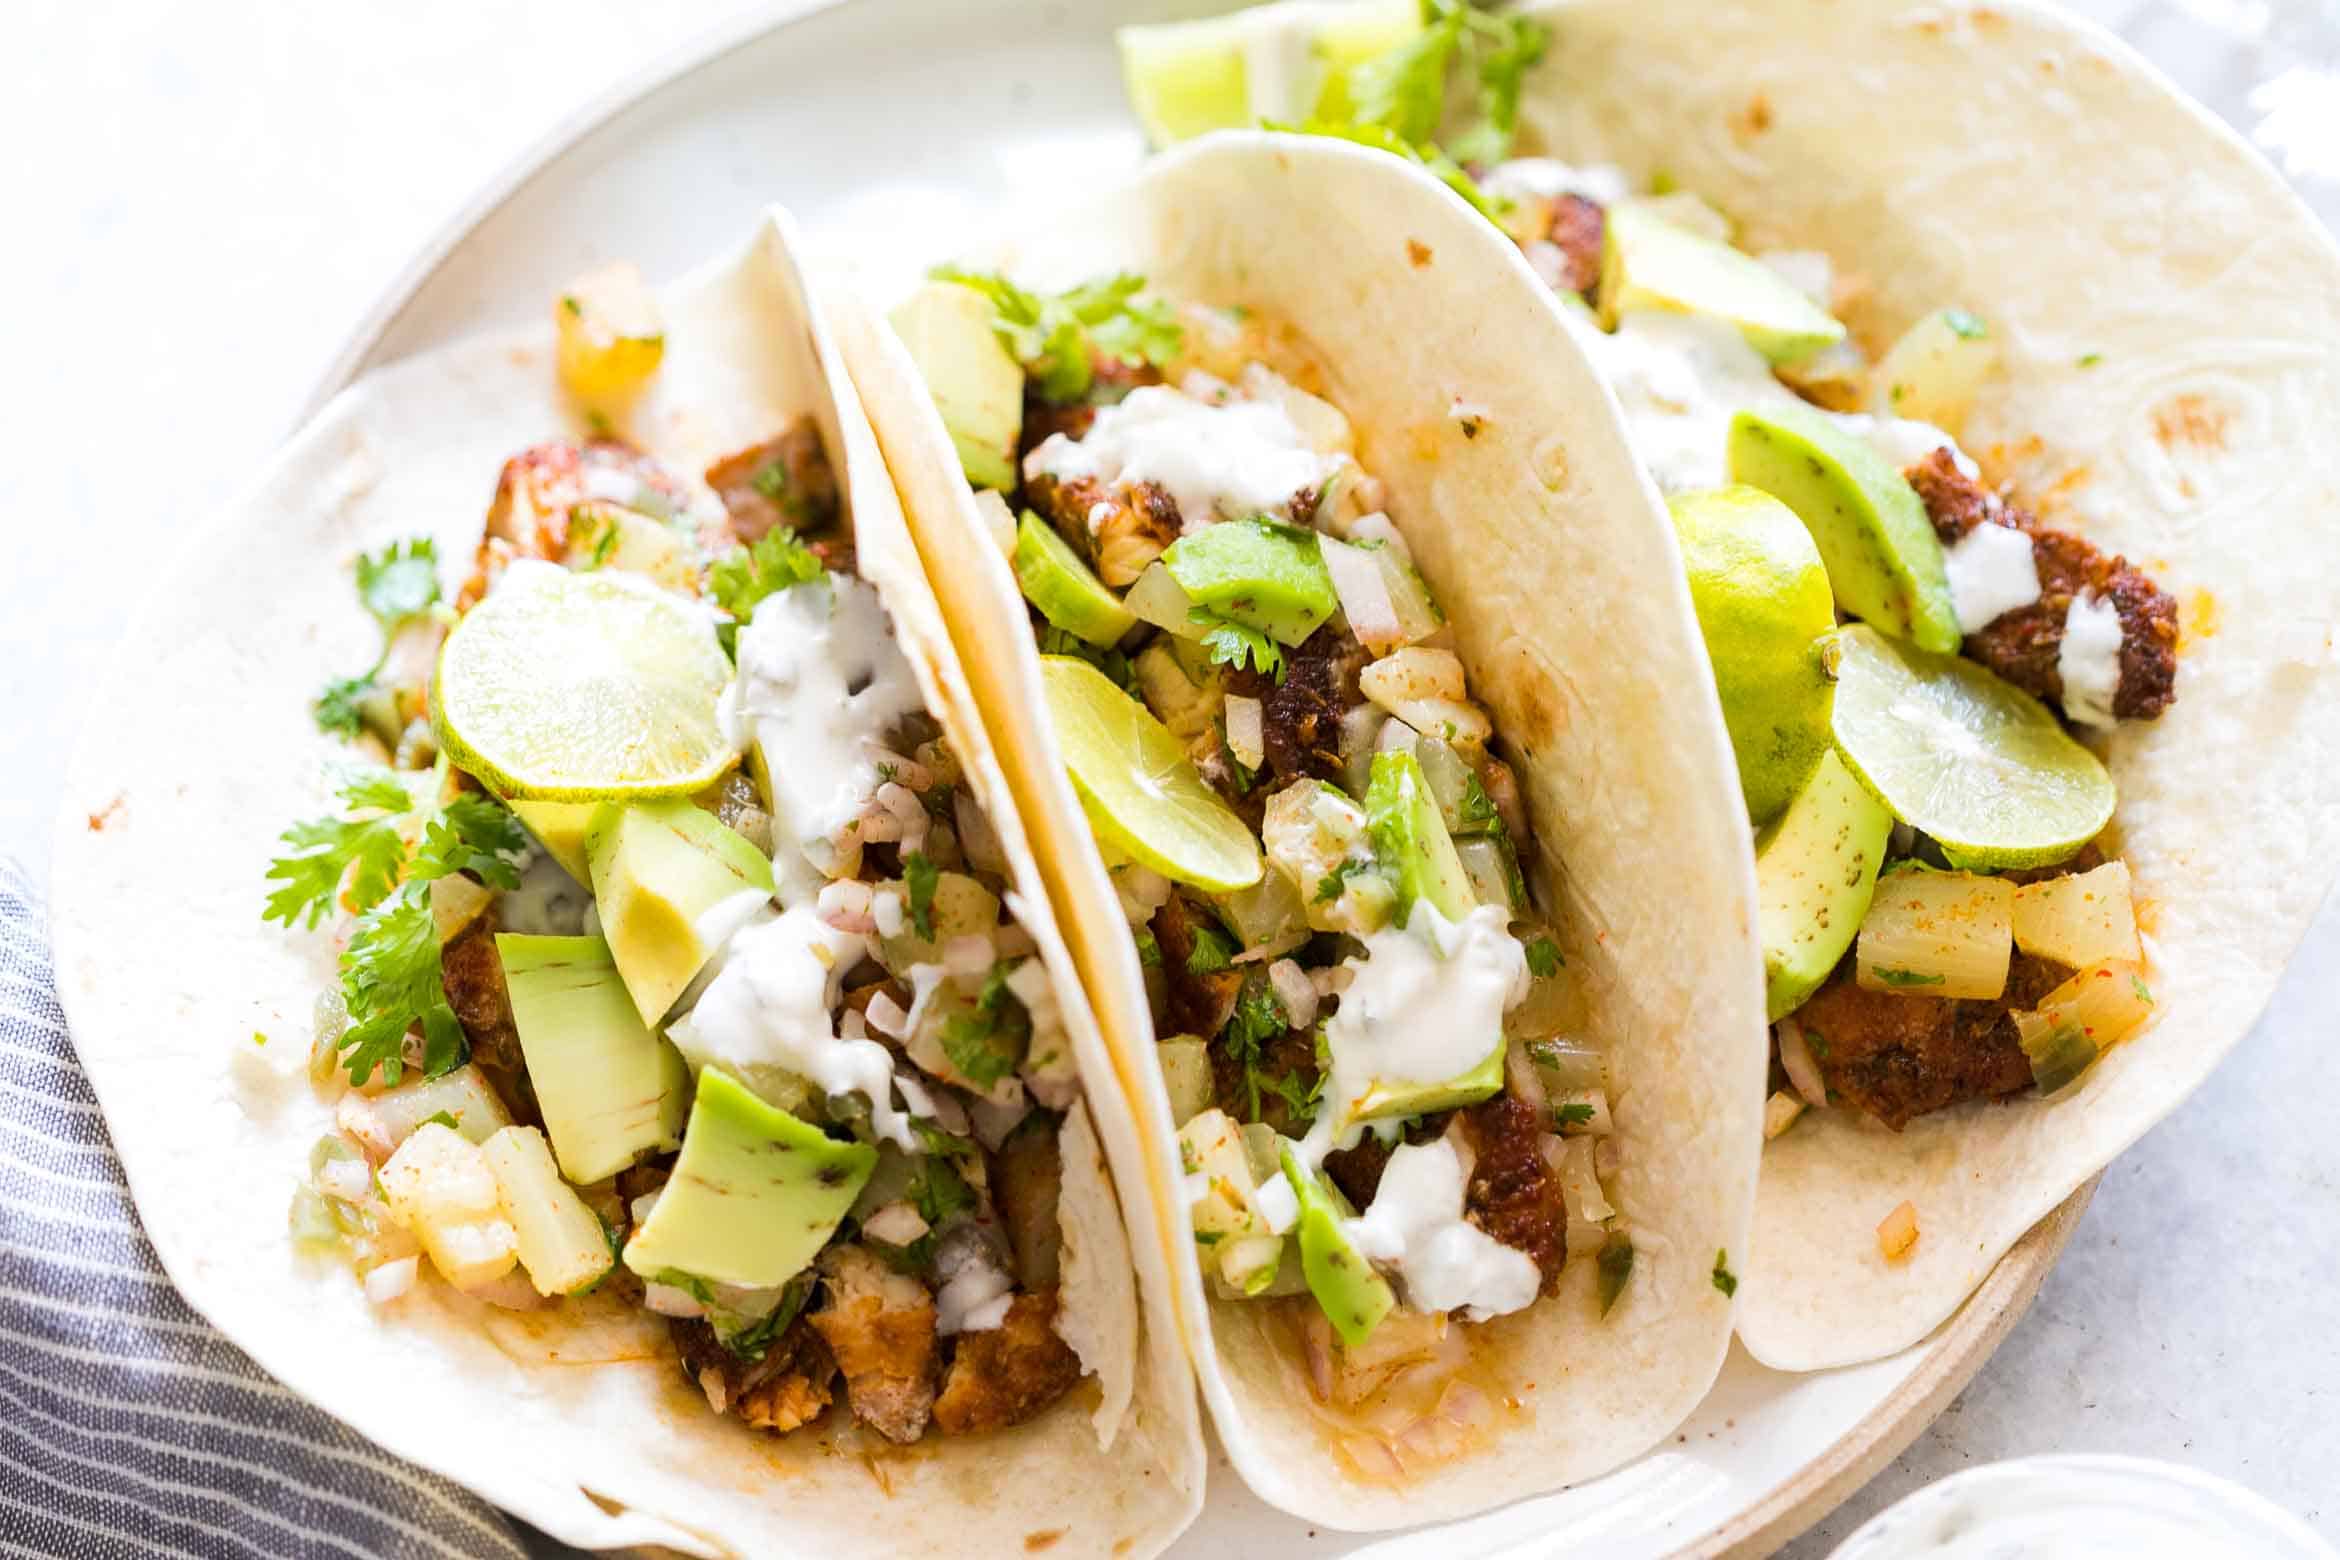 These tilapia fish tacos with pineapple salsa is just what you need when you want healthy dinner in 30 minutes! Topped with avocados and drizzled with a delicious yogurt and sour cream sauce, Taco Tuesday just became more delicious!